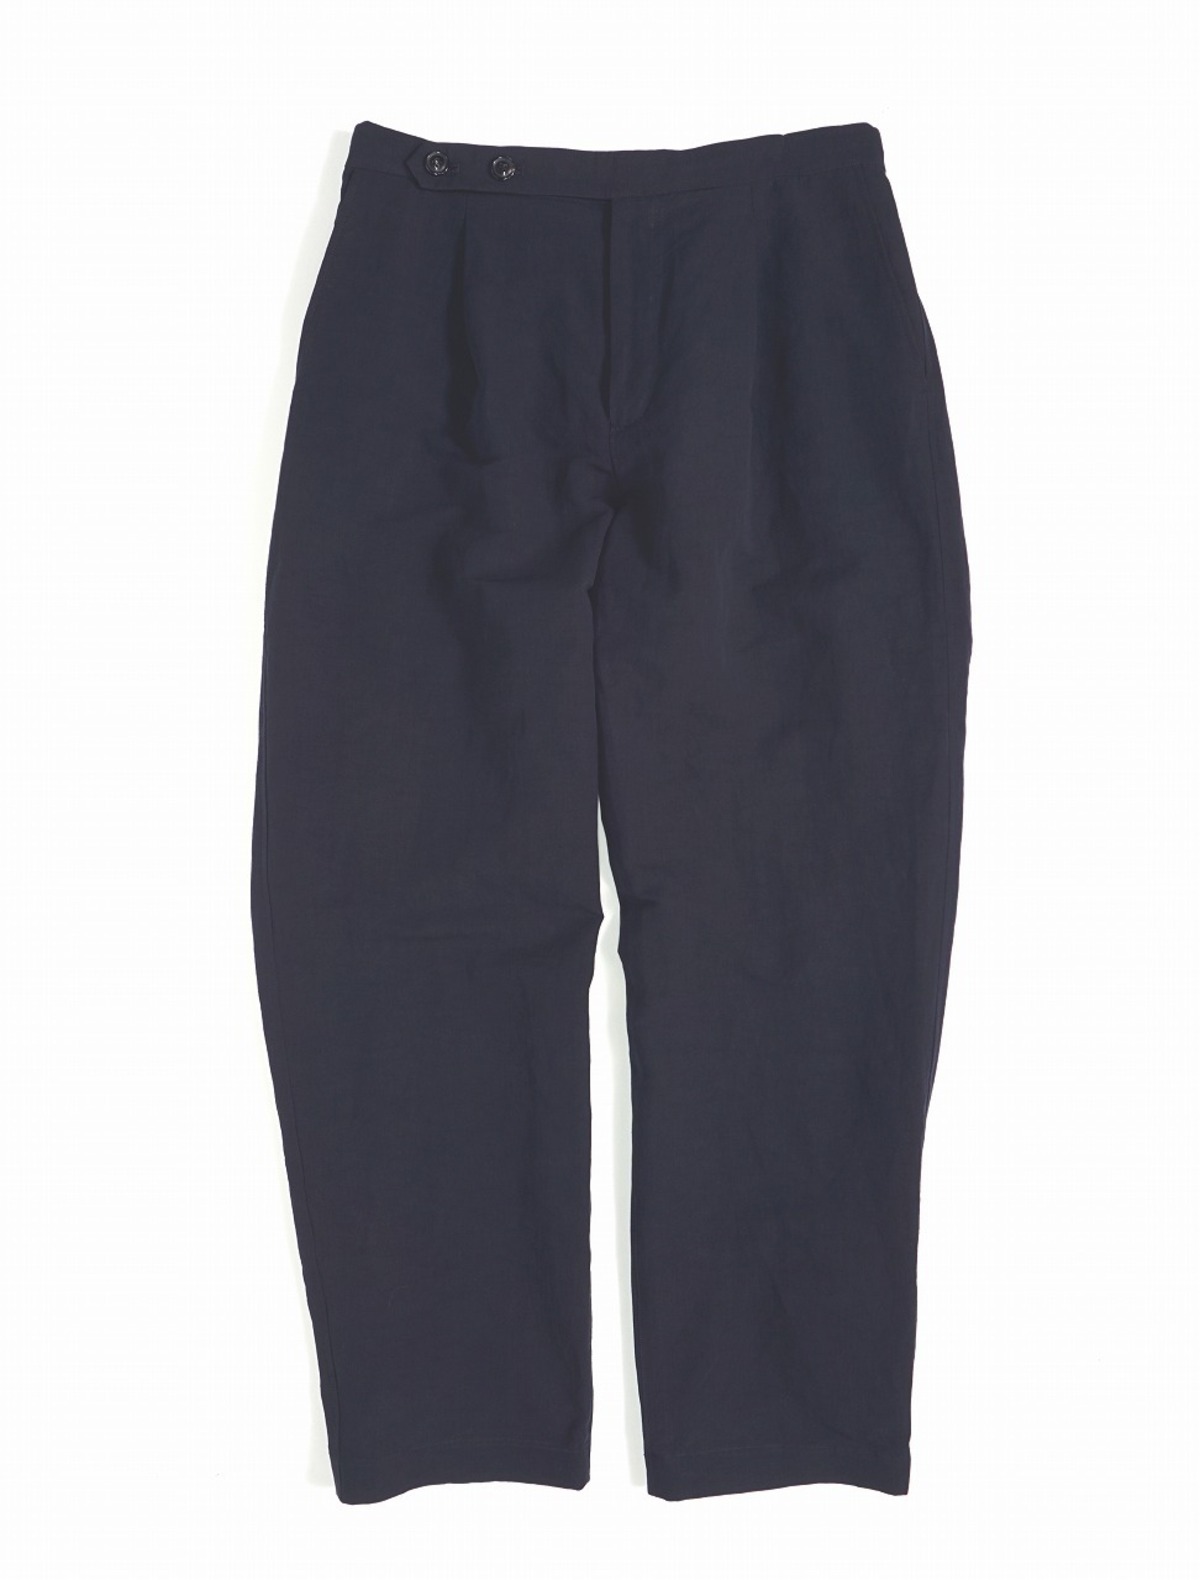 Cotton Linen Typewriter Trousers | comm. arch. ONLINE STORE